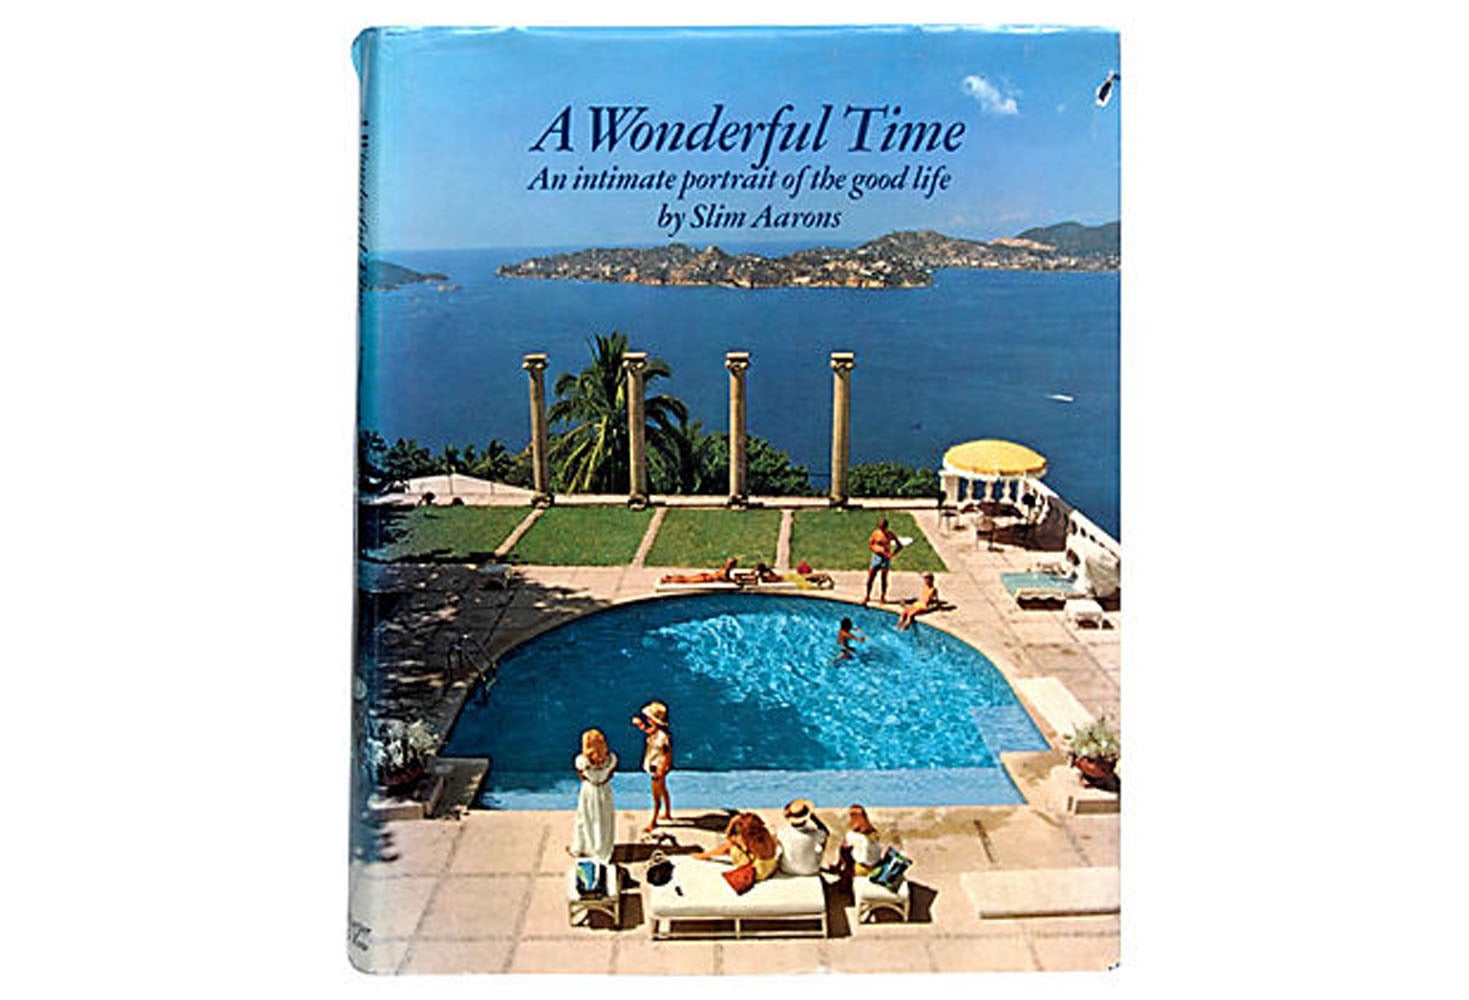 "A Wonderful Time" Book by Slim Aarons